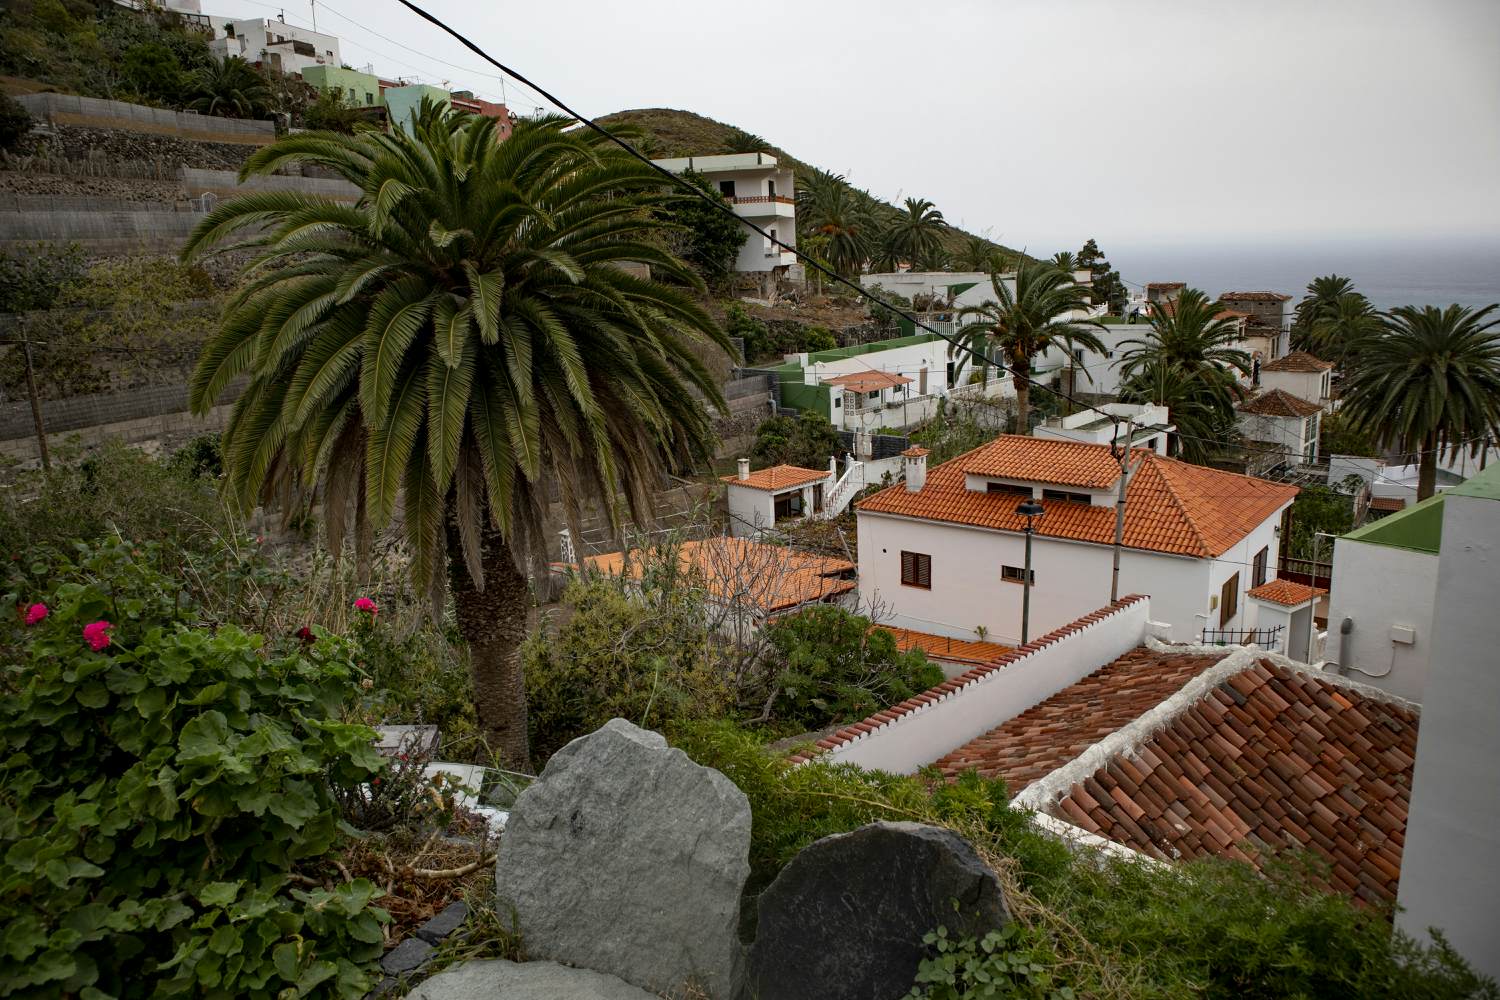 View of the district Portugal - Taganana